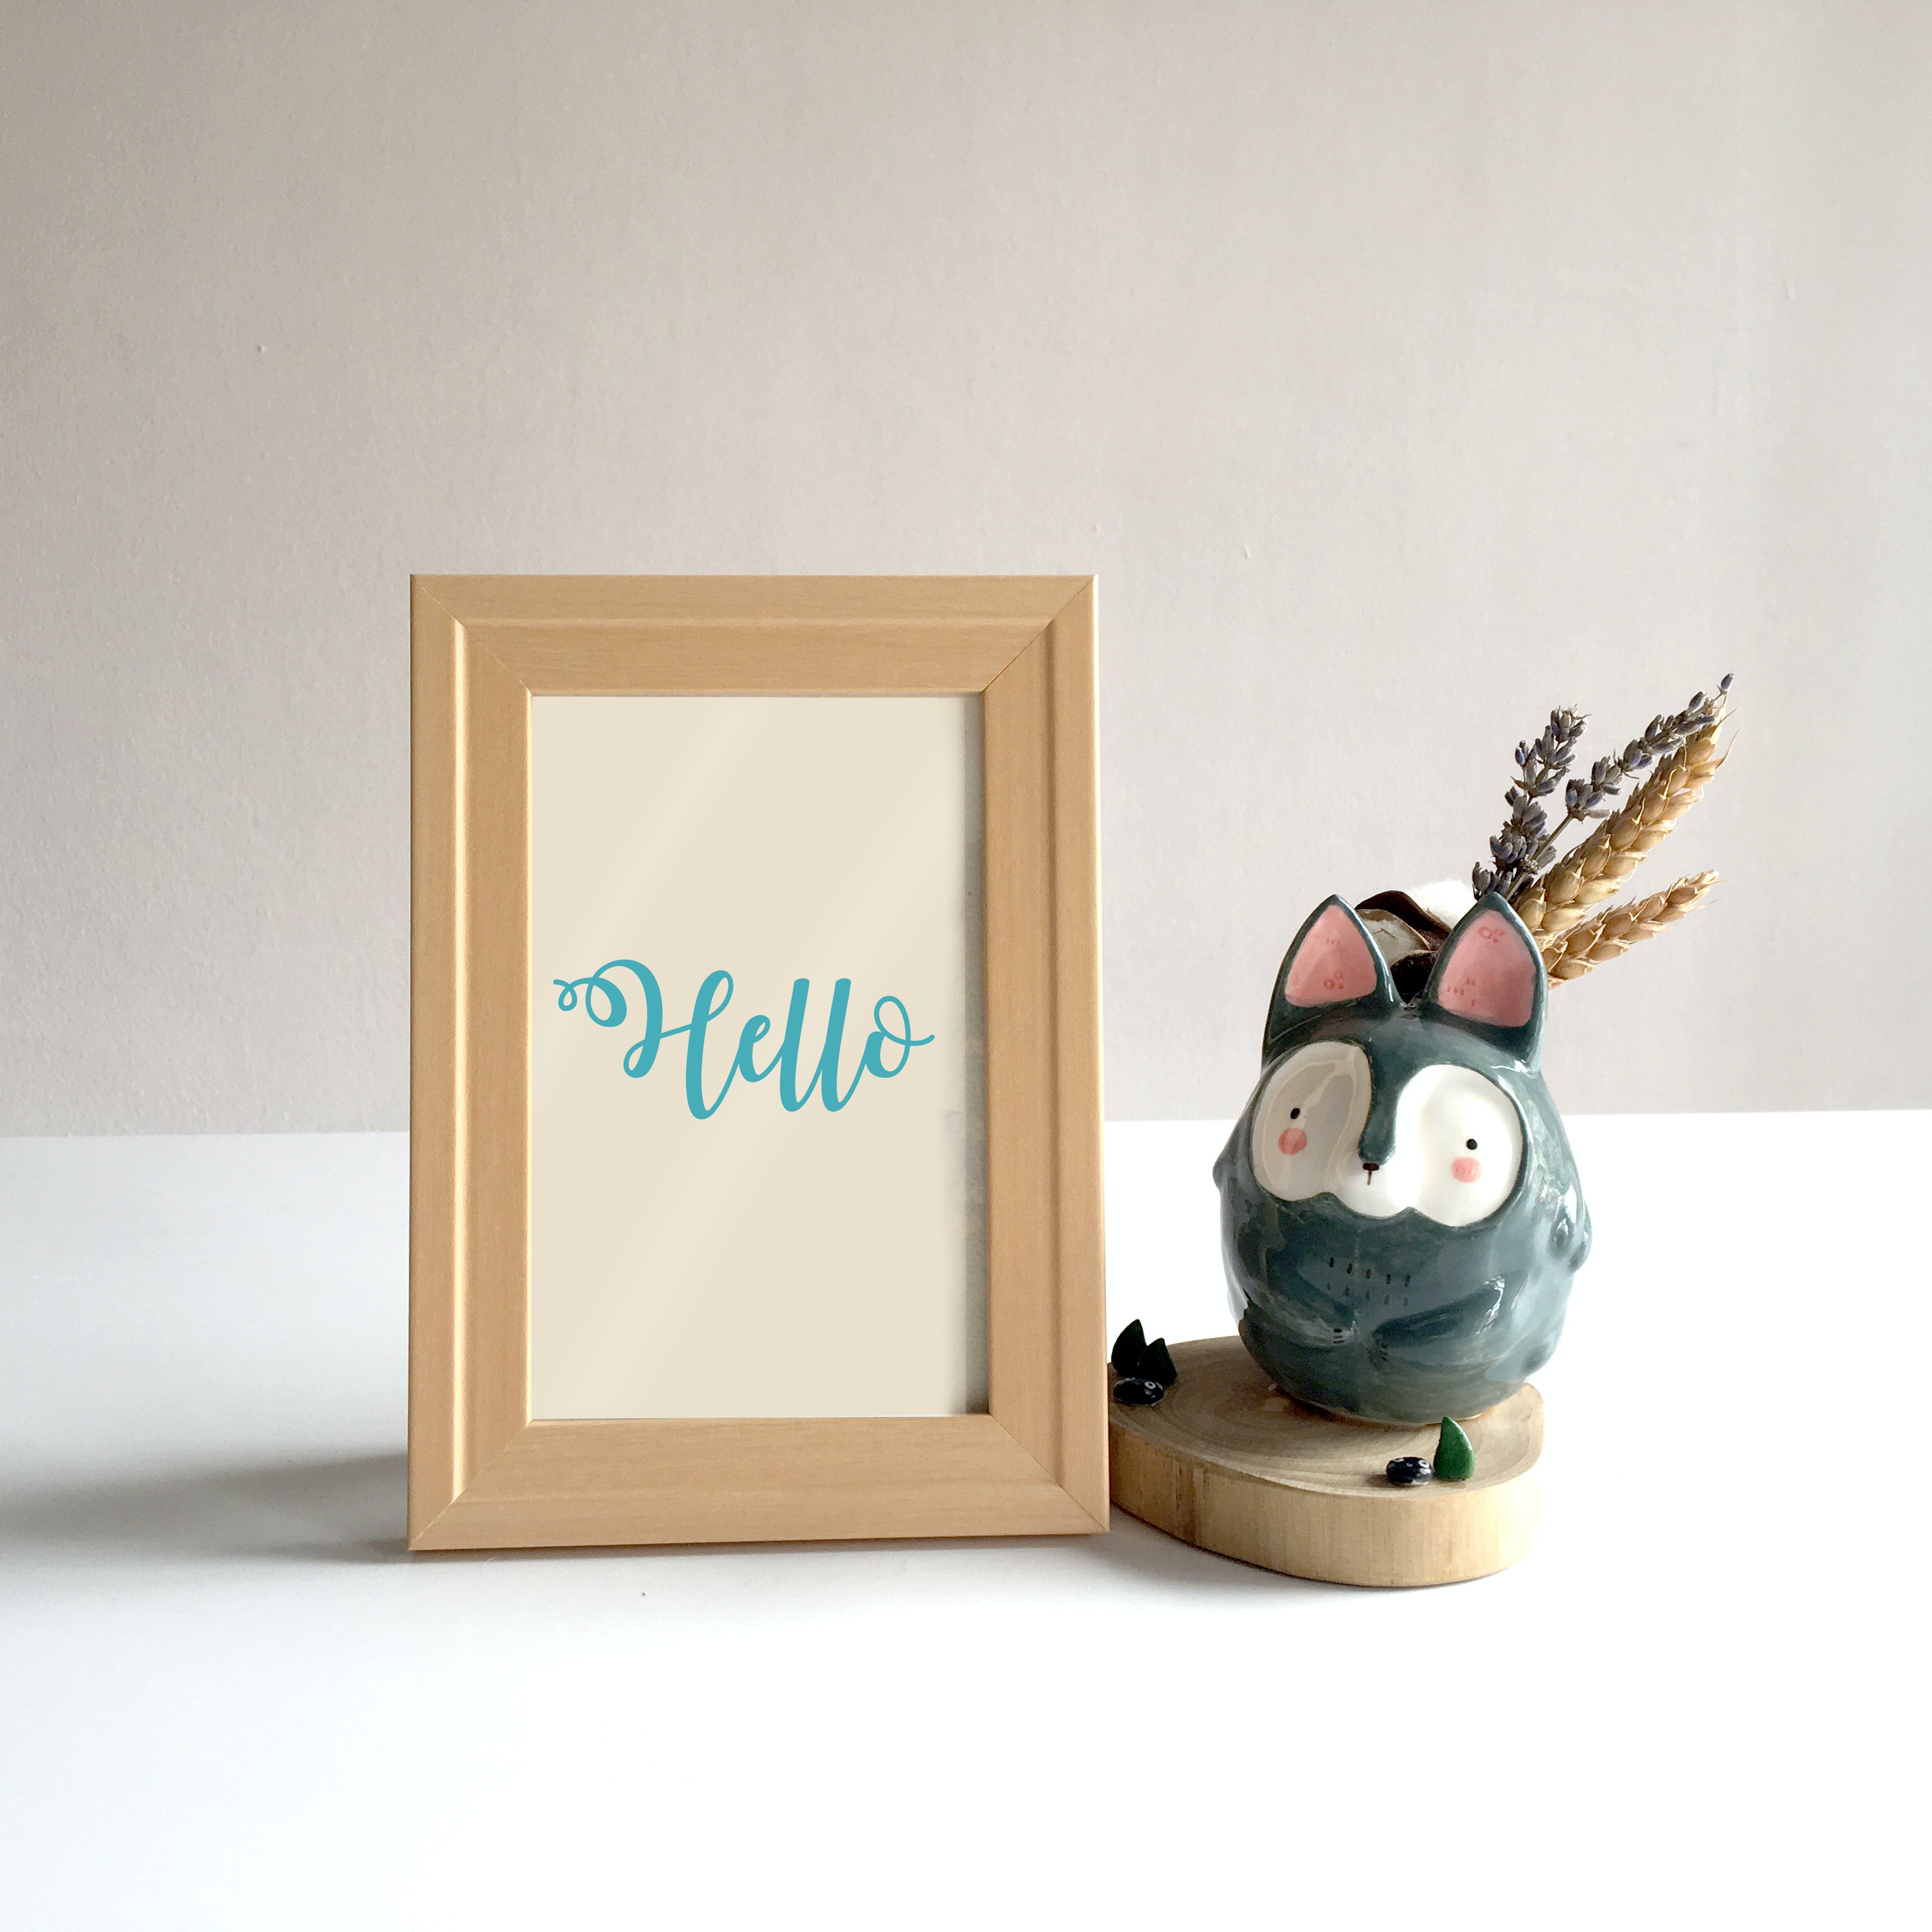 The word "hello" written is swirly writing sits in a beige picture frame with a small wooden animal sitting beside it.